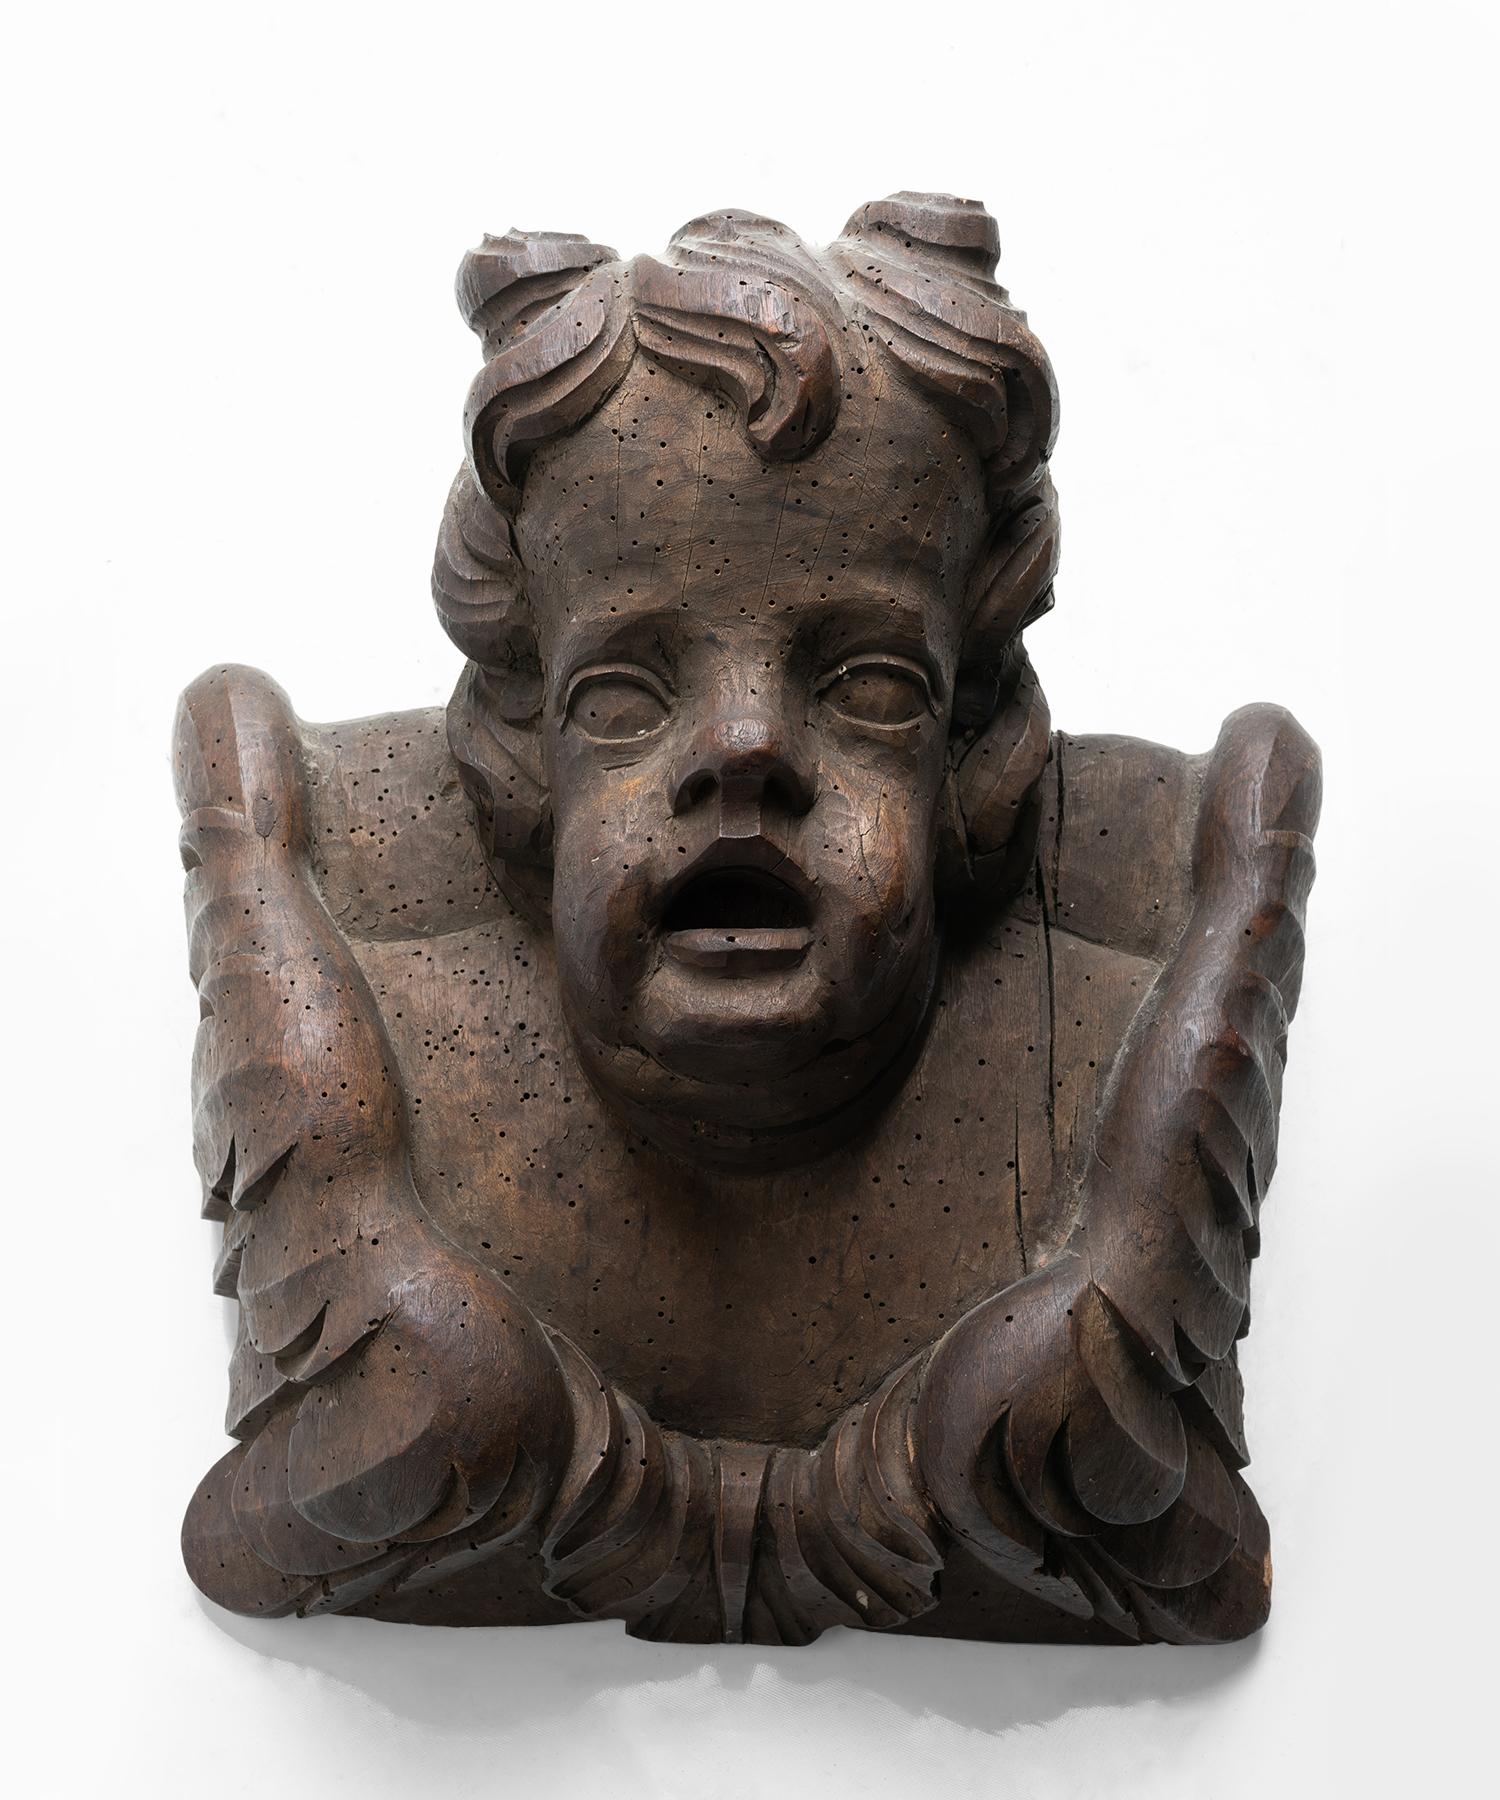 Wooden cherub, Italy 18th century.

Beautifully carved sculpture with original patina.